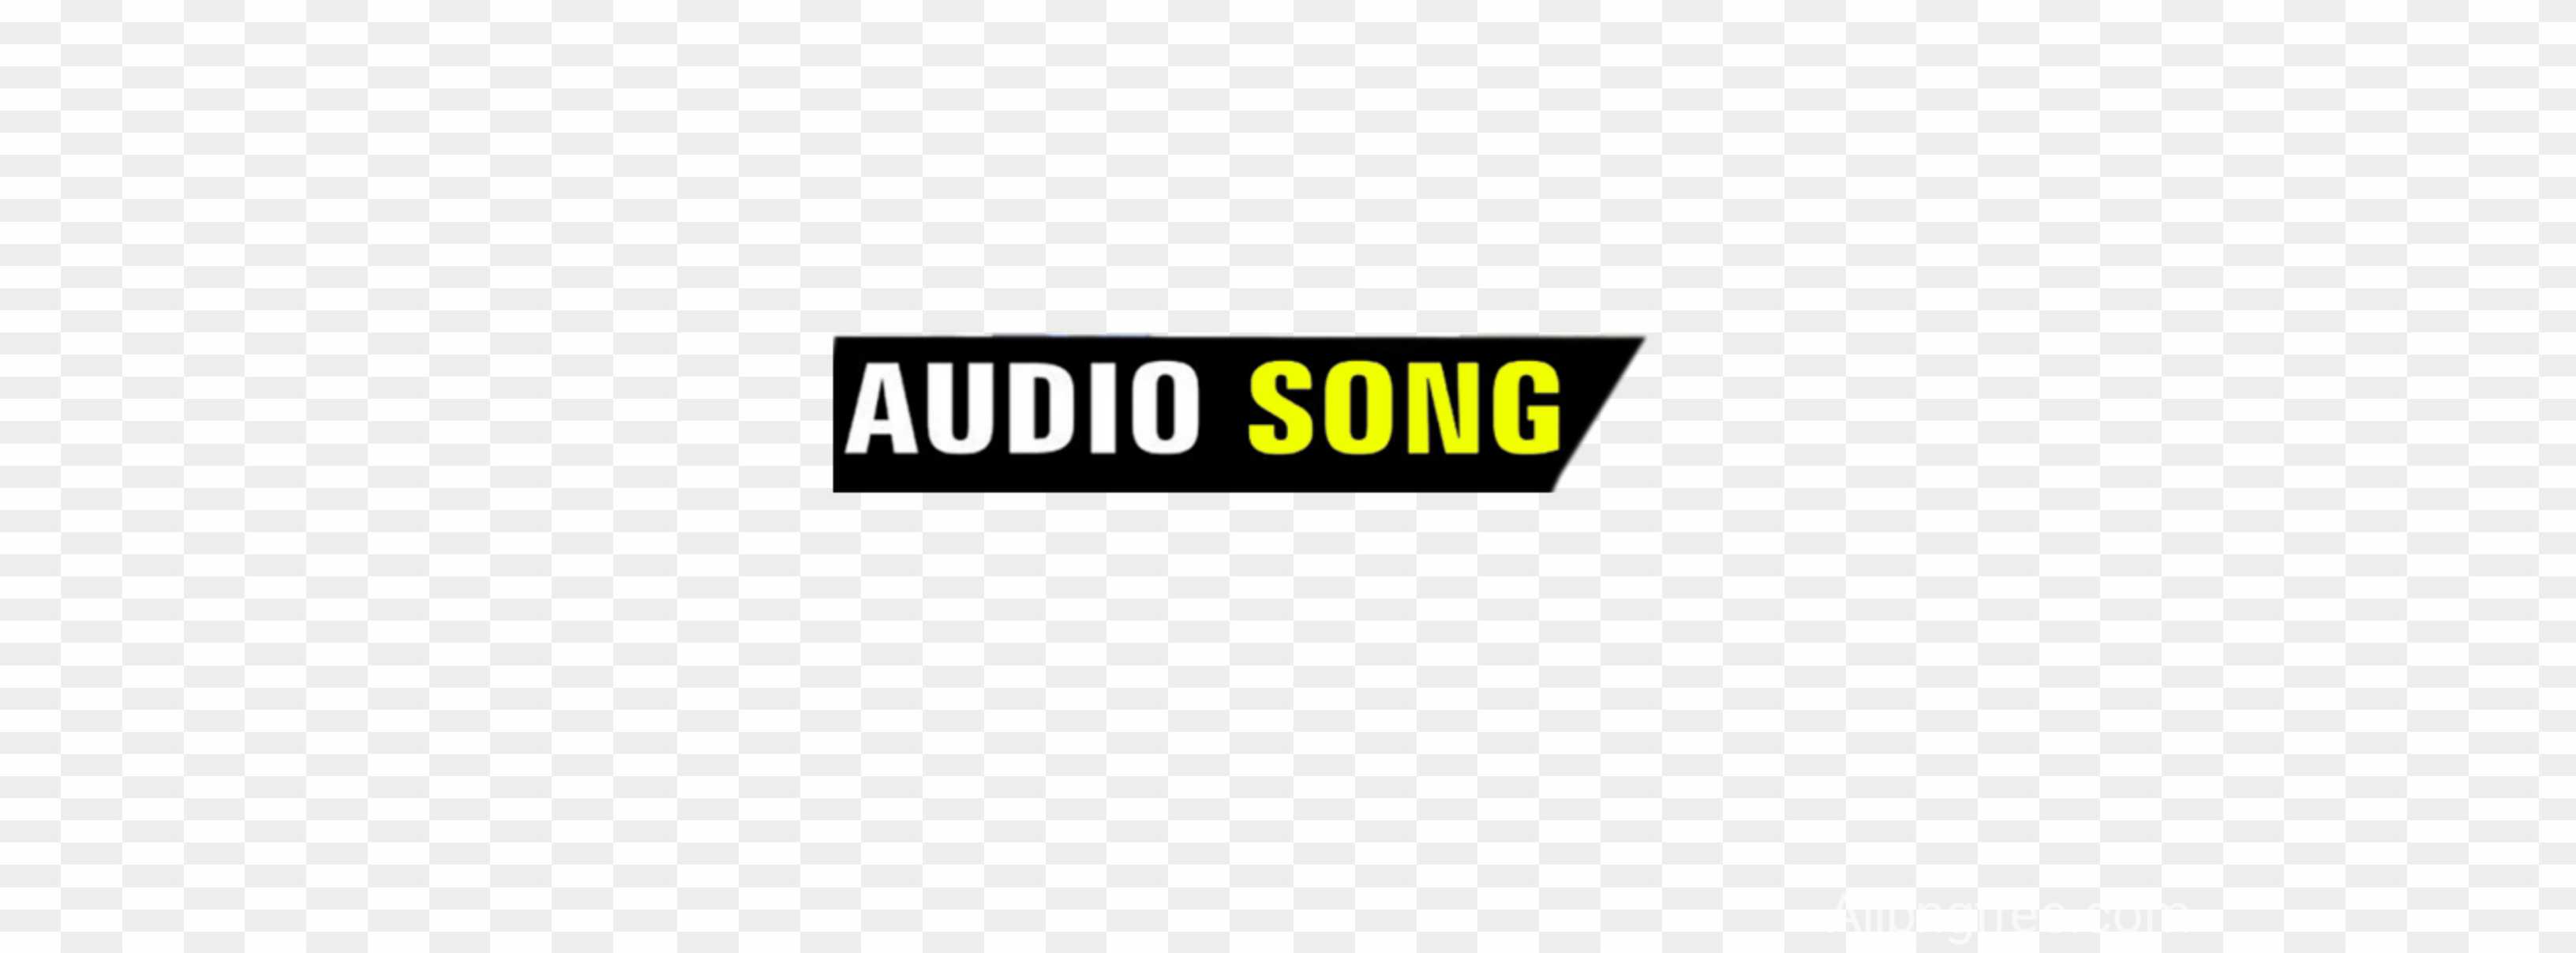 Audio song logo PNG_poster designing PNG images